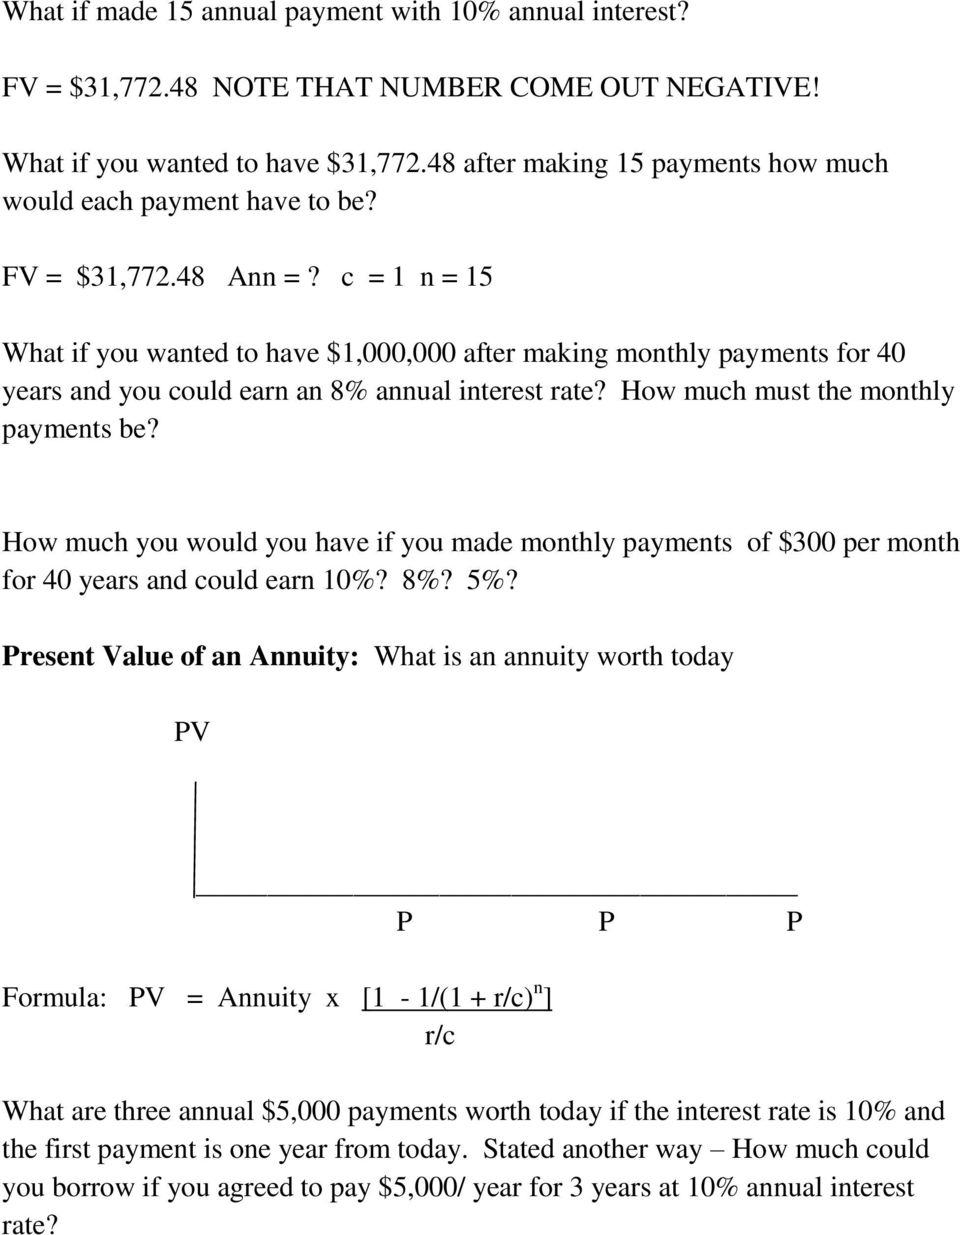 c = 1 n = 15 What if you wanted to have $1,000,000 after making monthly payments for 40 years and you could earn an 8% annual interest rate? How much must the monthly payments be?